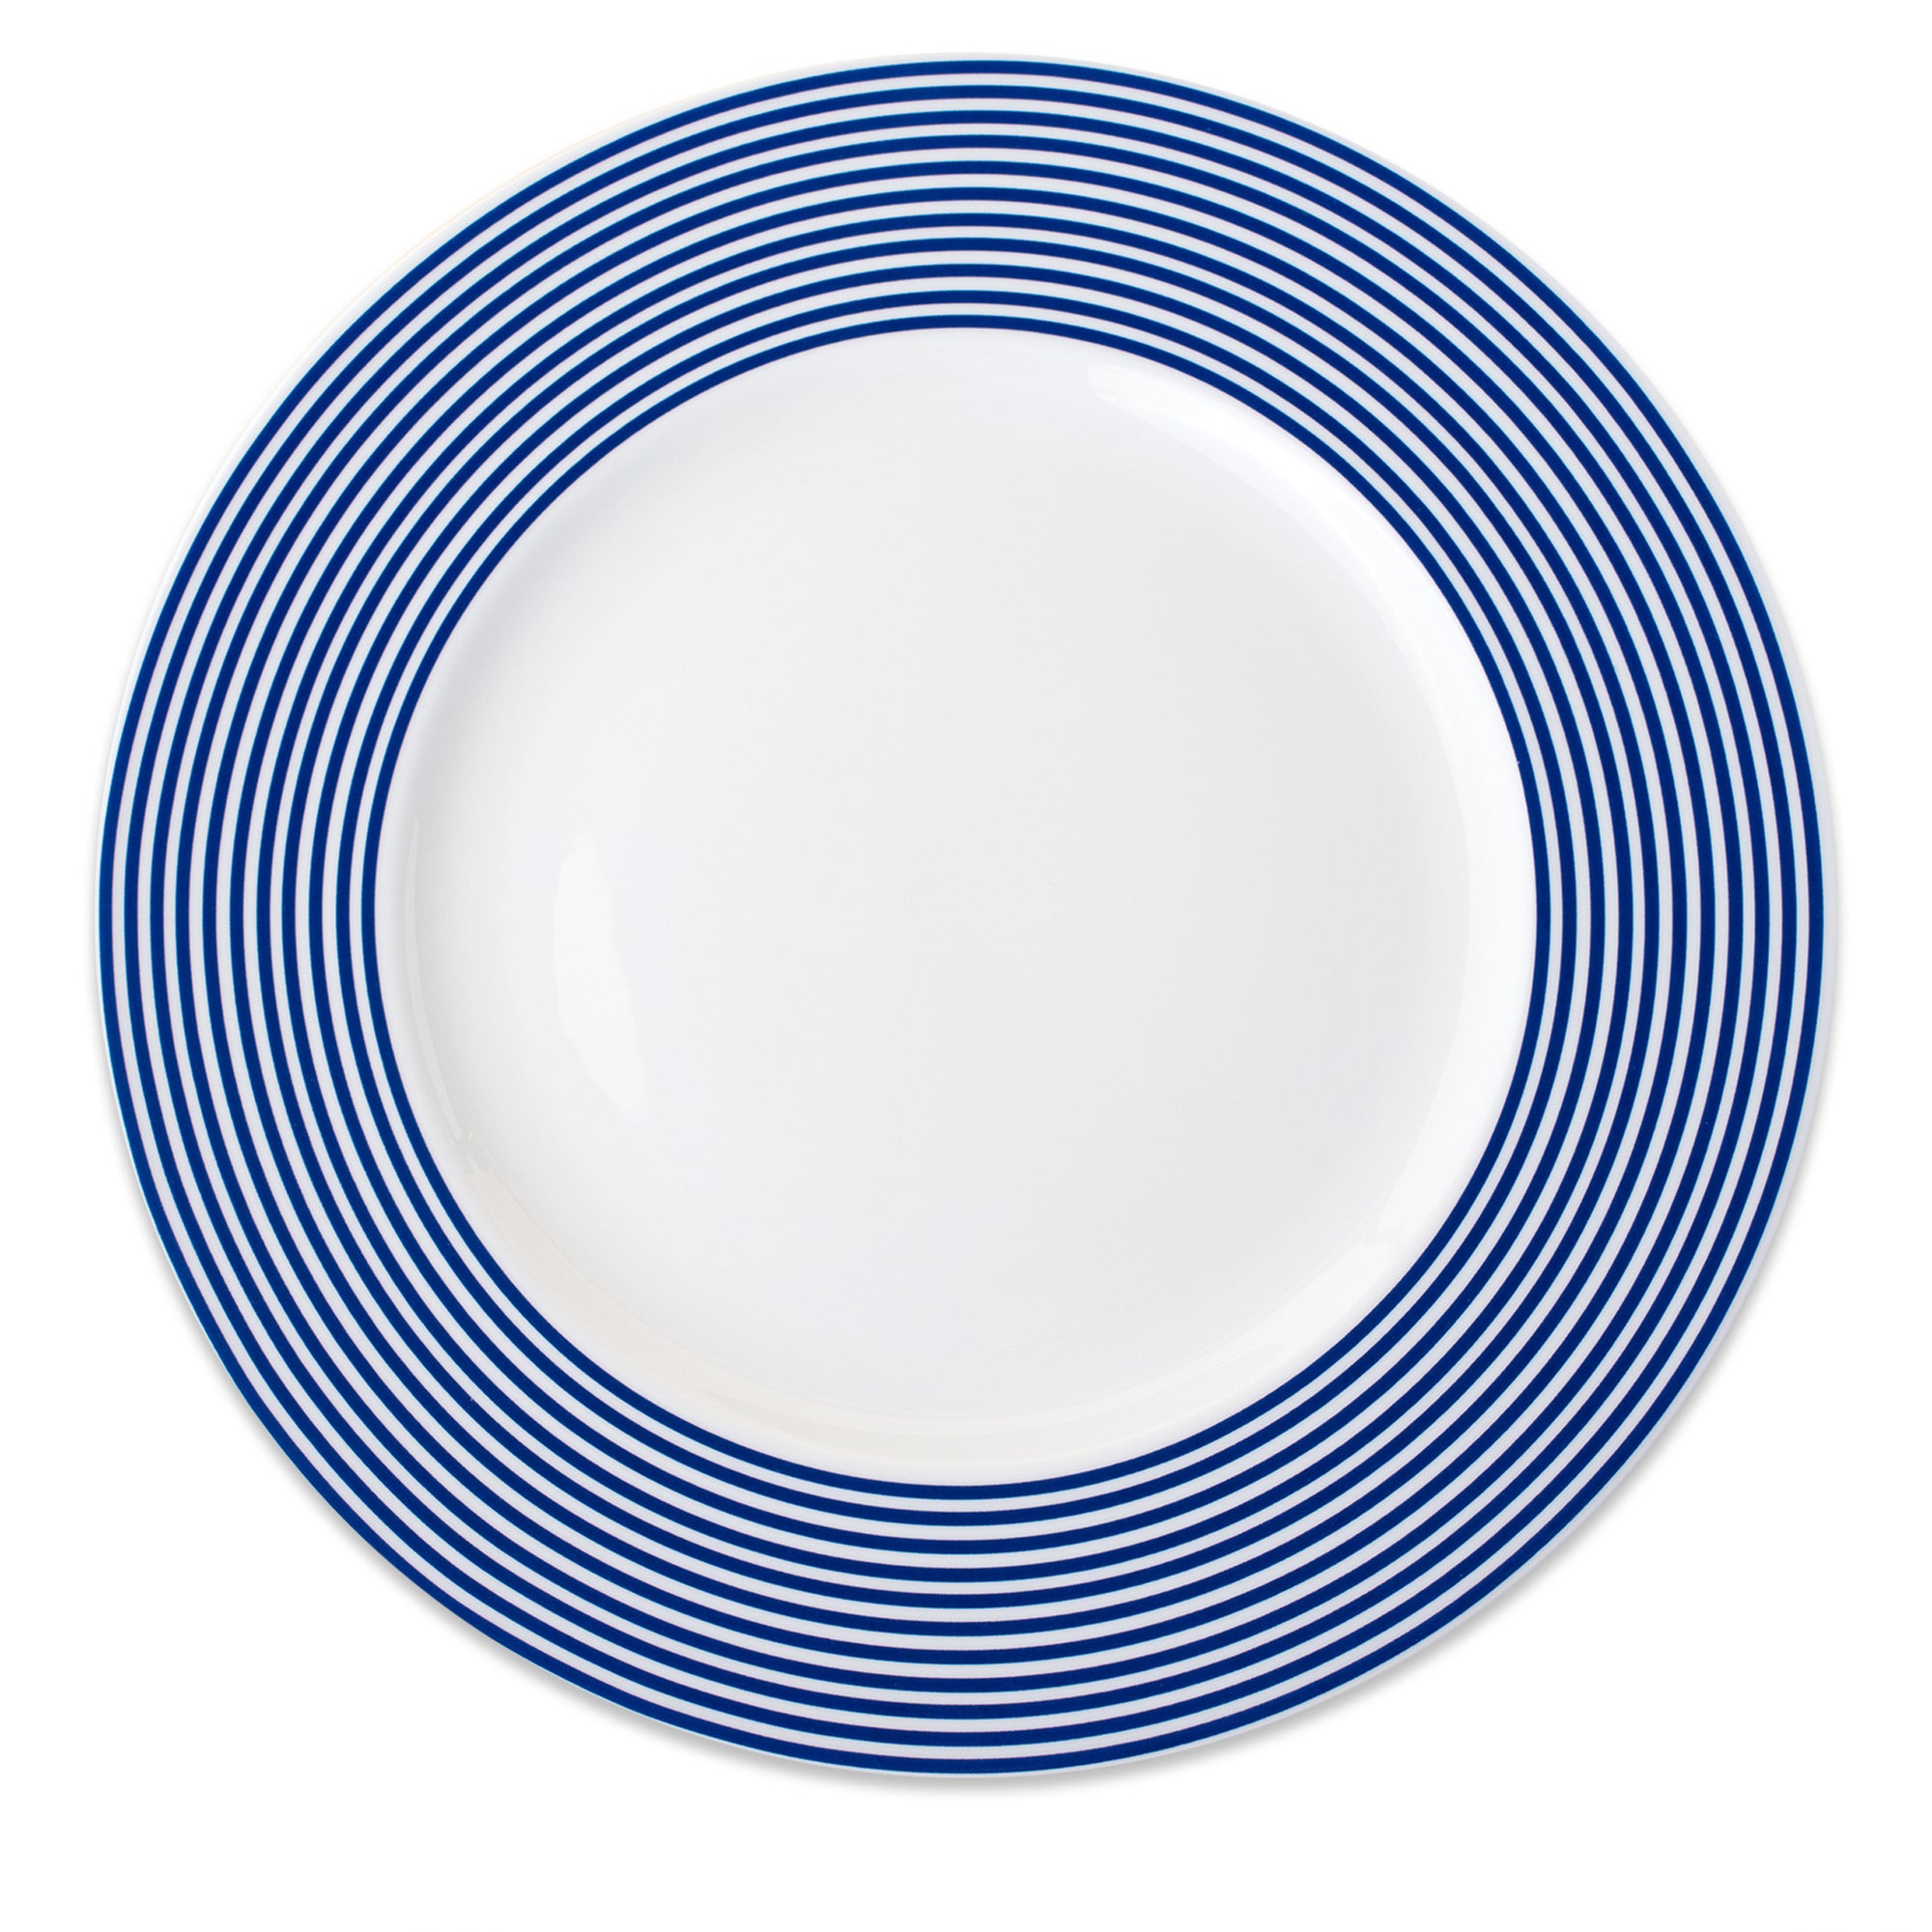 White ceramic Newport Rimmed Charger Plate by Caskata Artisanal Home, featuring concentric Newport Stripe blue circles.